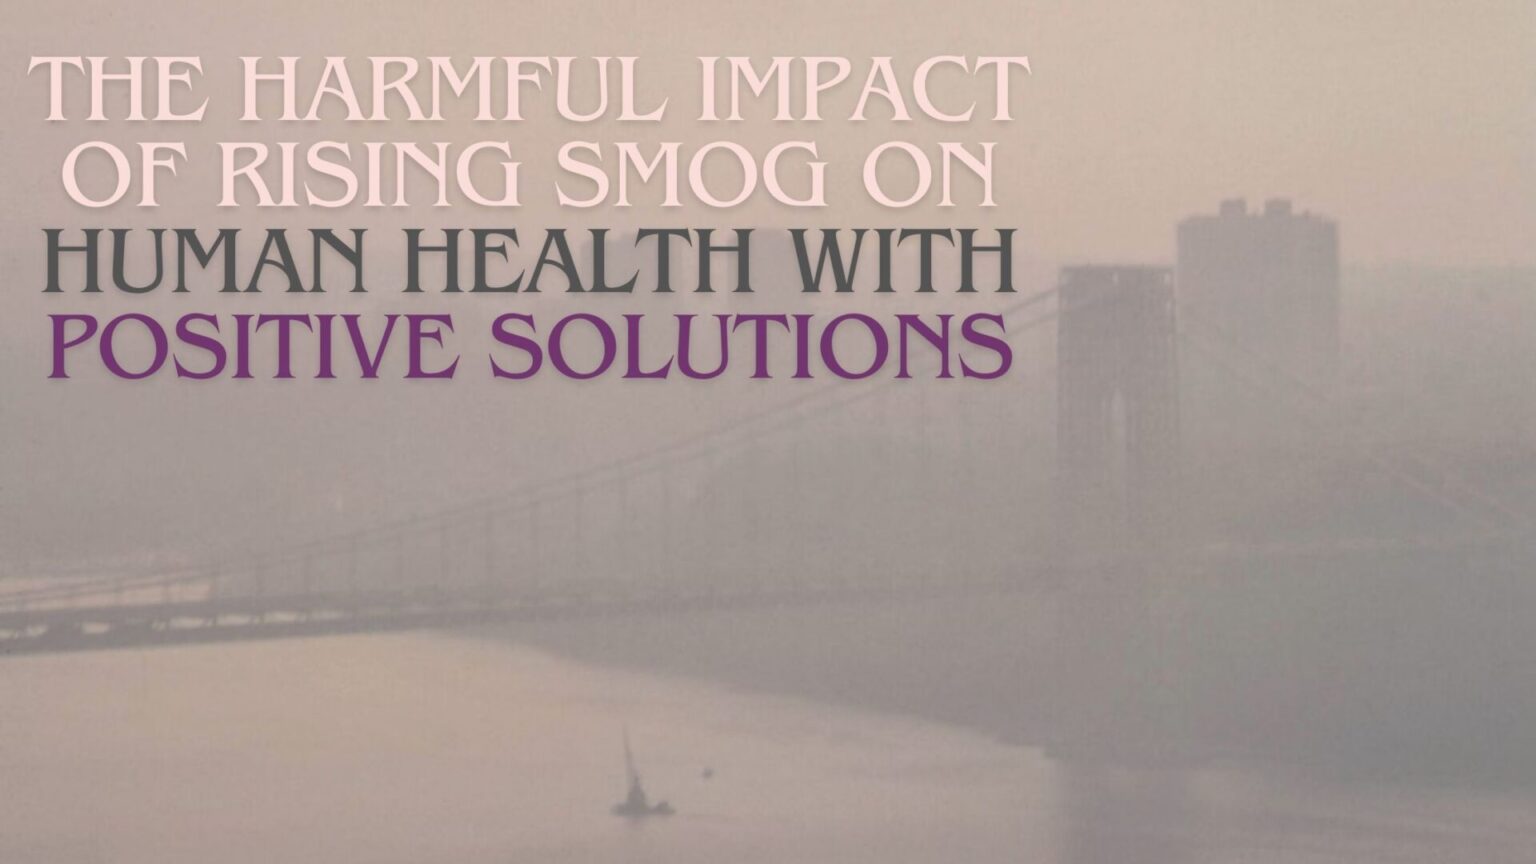 Clearing the Air: Confronting the Harmful Impact of Rising Smog on Human Health with Positive Solutions